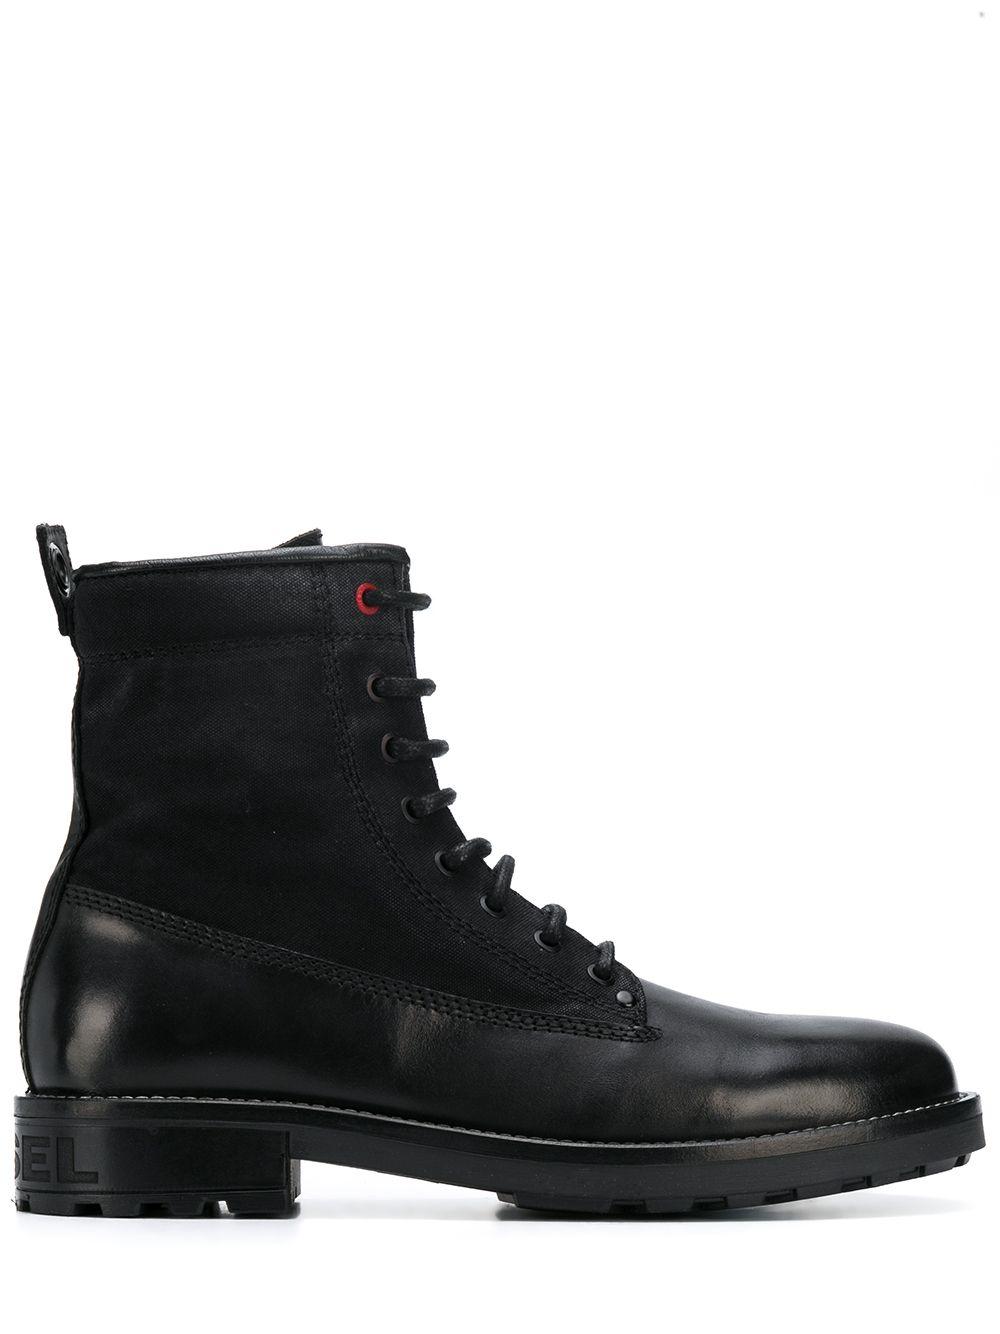 DIESEL Leather Lace-up Combat Boots in Black for Men - Lyst